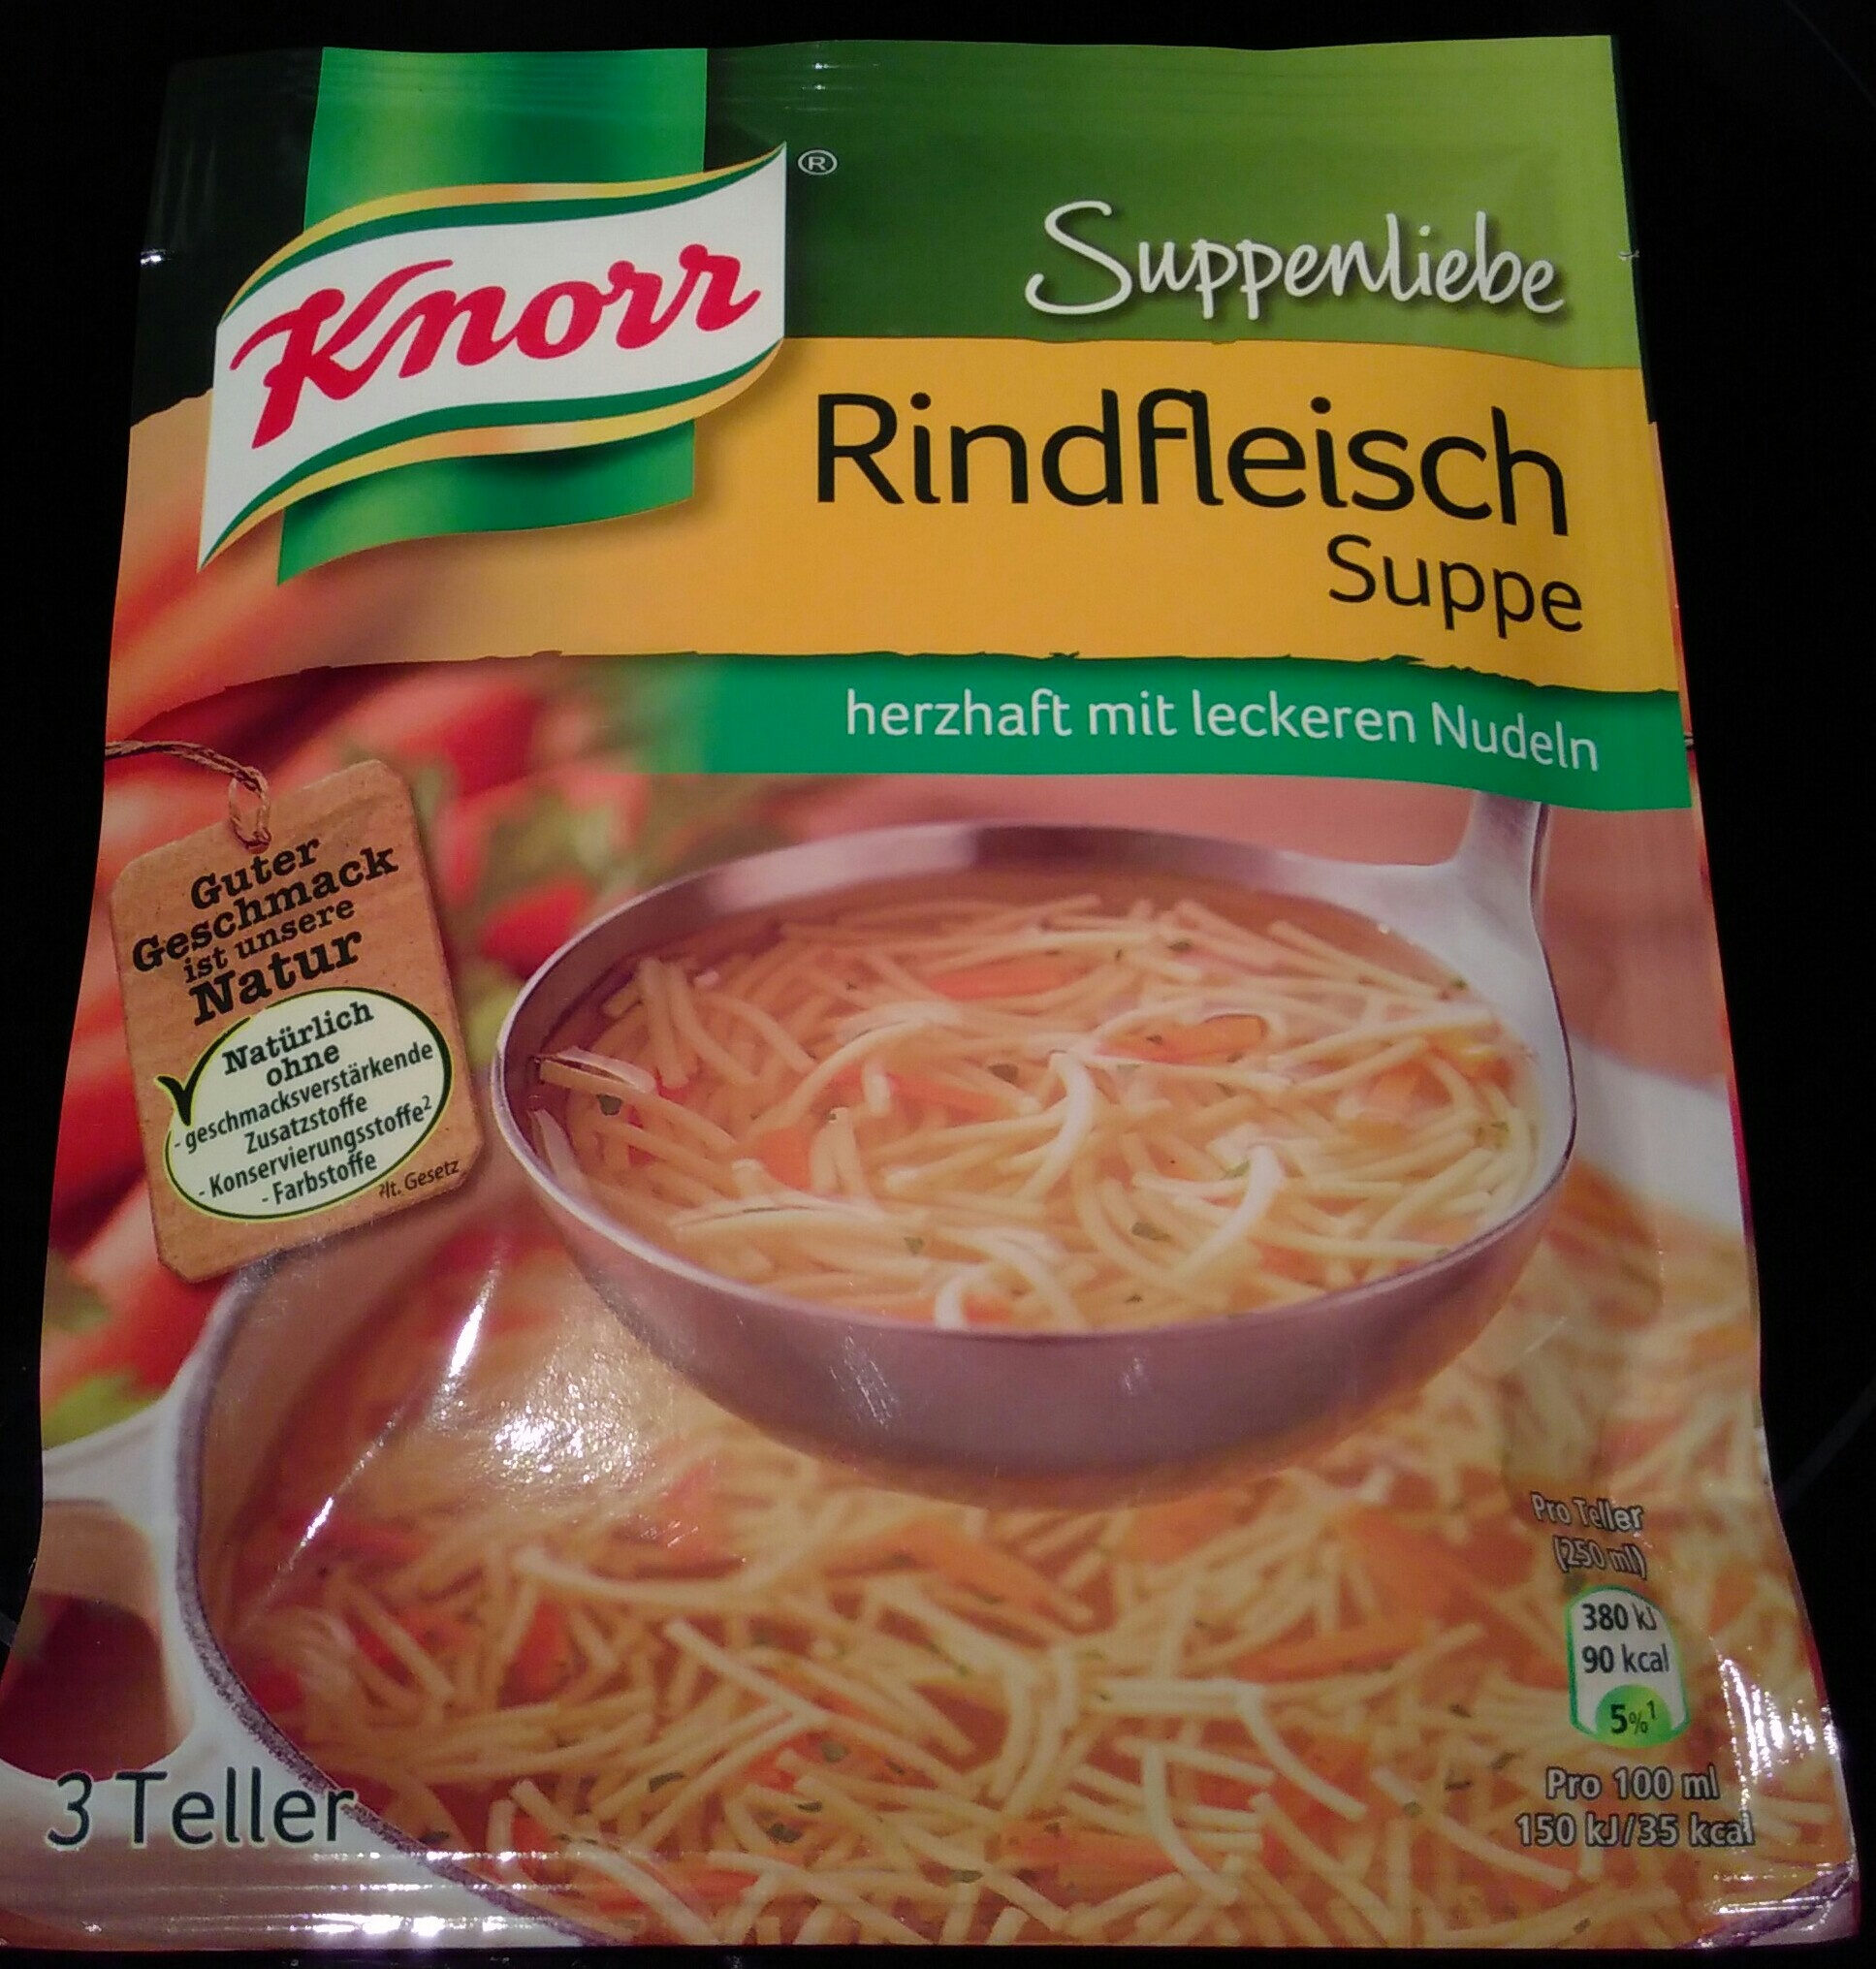 Knorr Suppenliebe Rindfleisch Suppe - Product - de